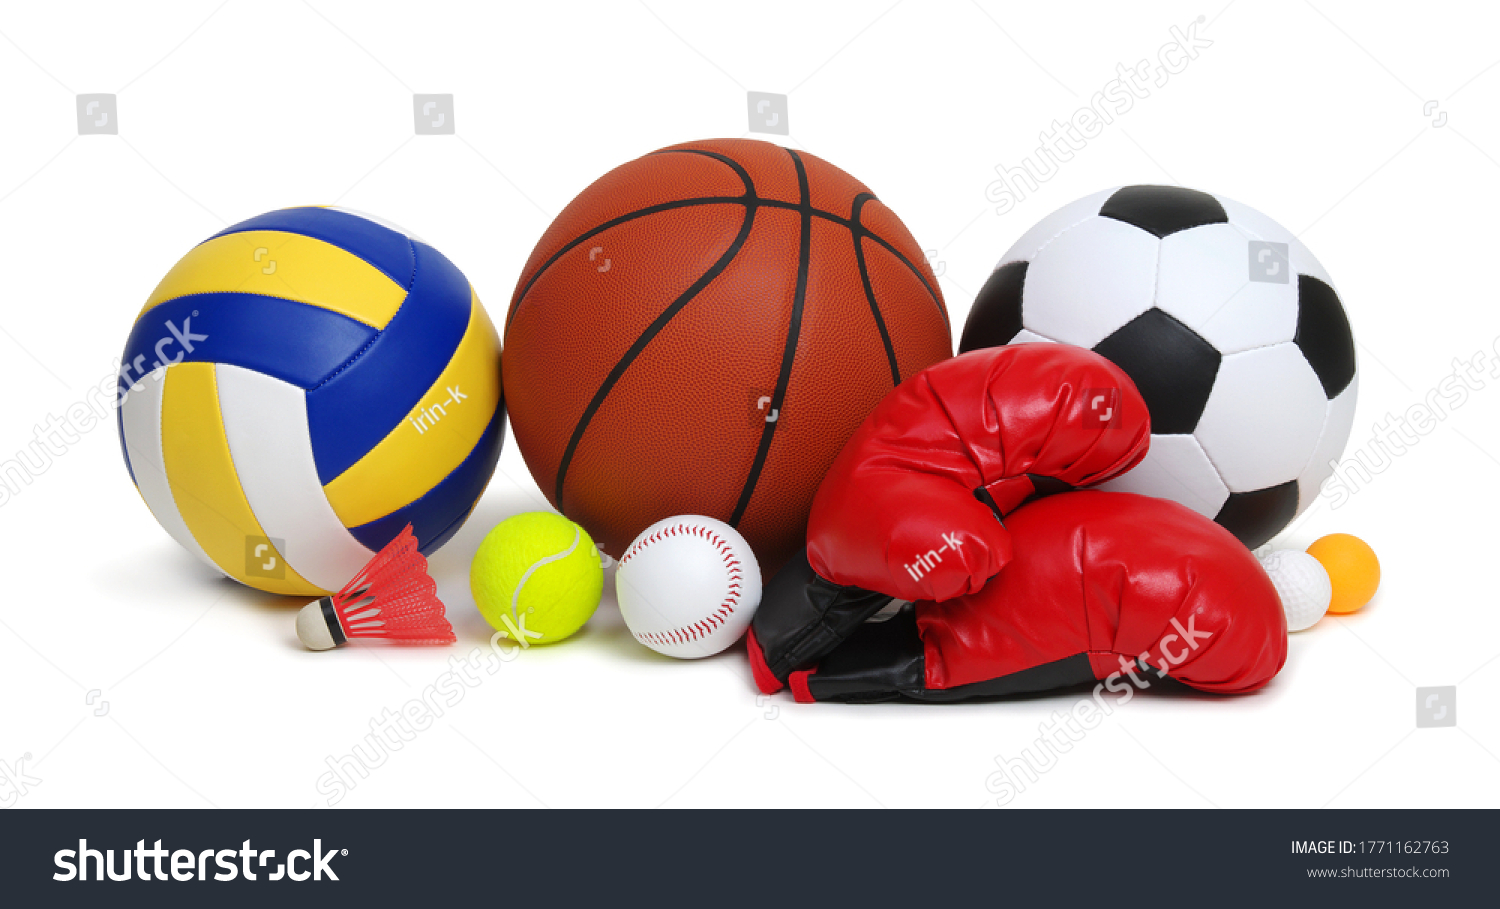 Sports equipment isolated on white background #1771162763